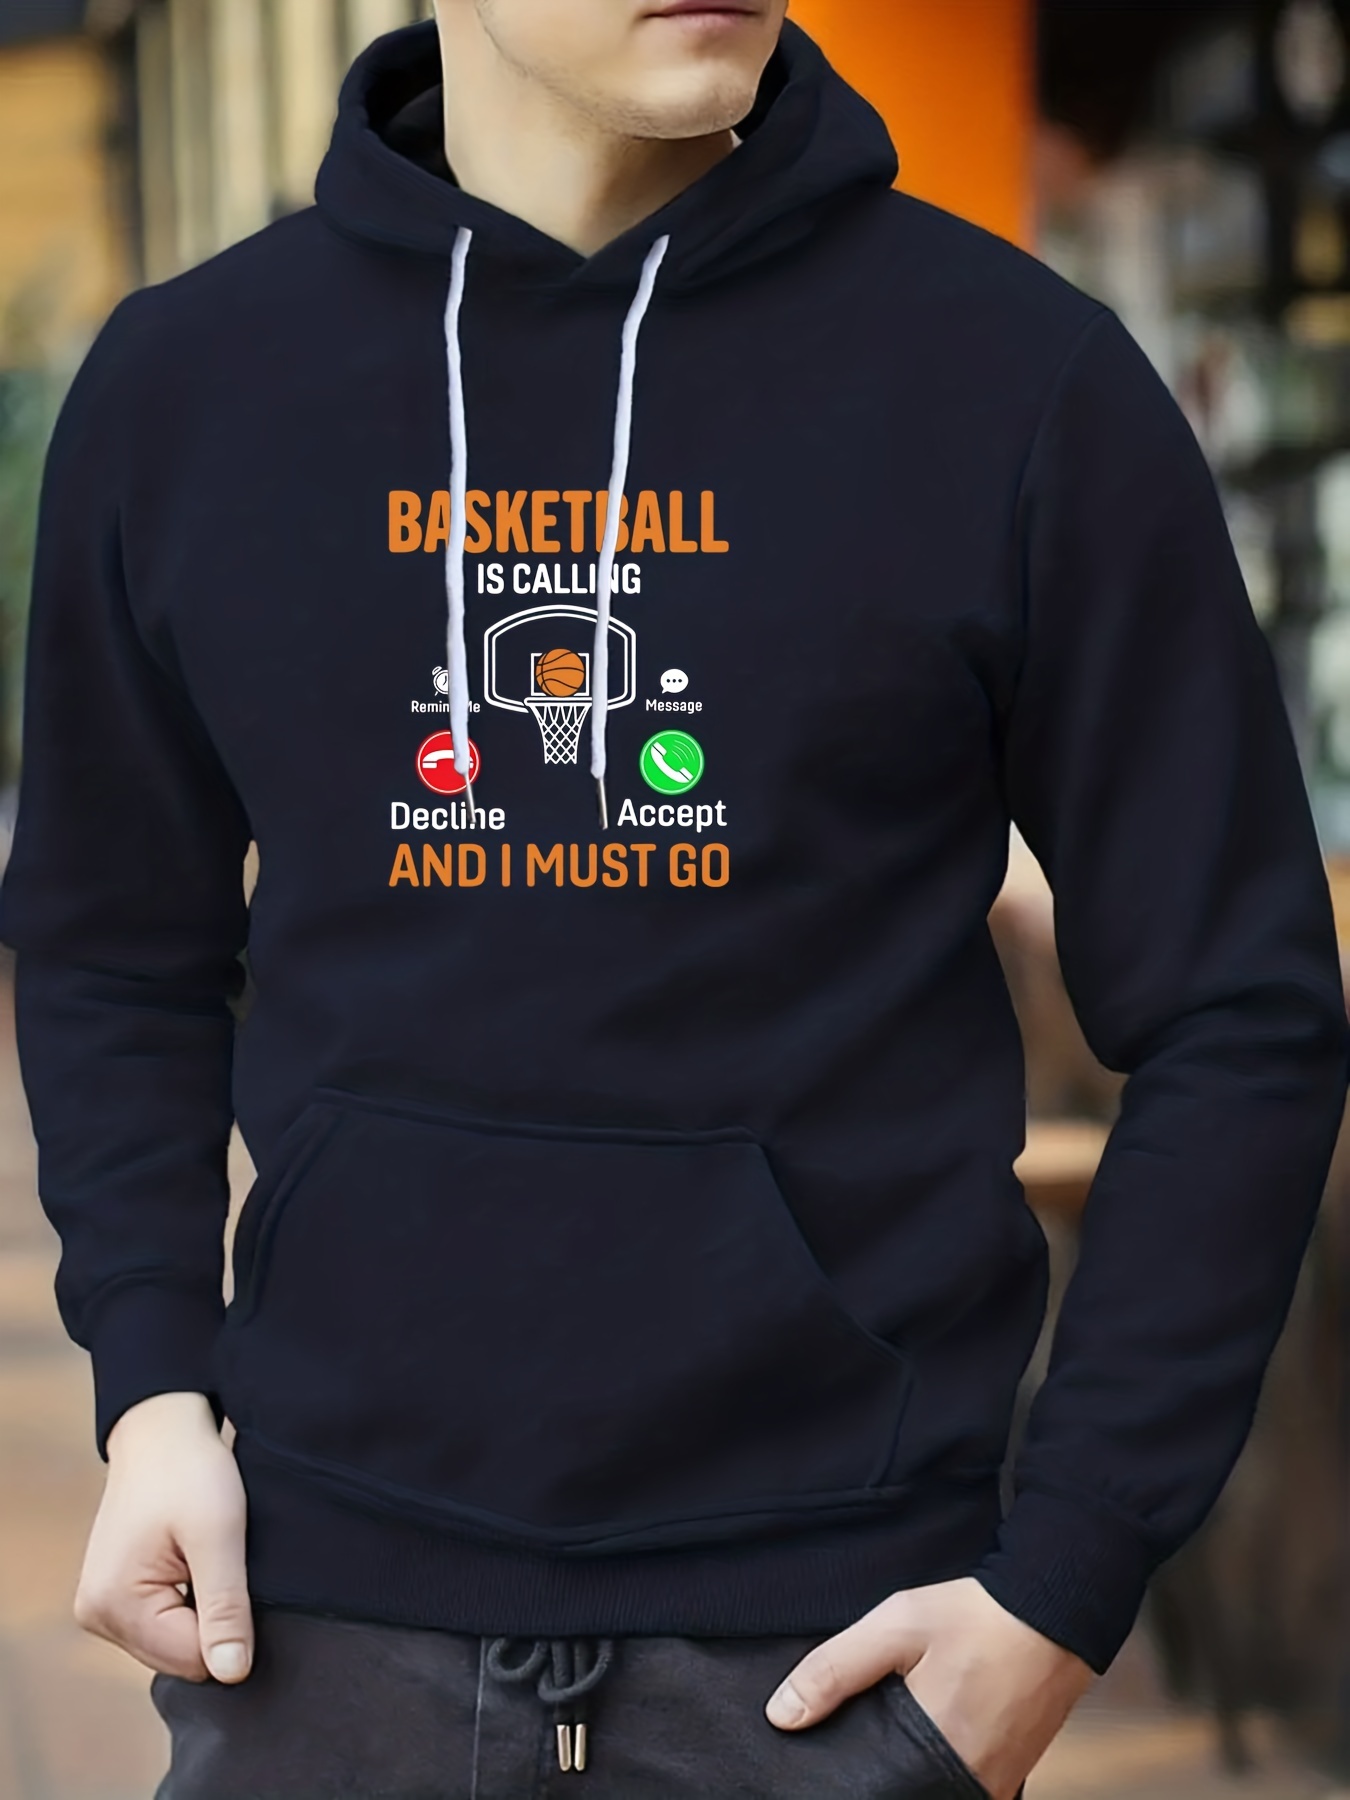 Basketball Print, Men's Outfits, Casual Hoodies Long Sleeve Color